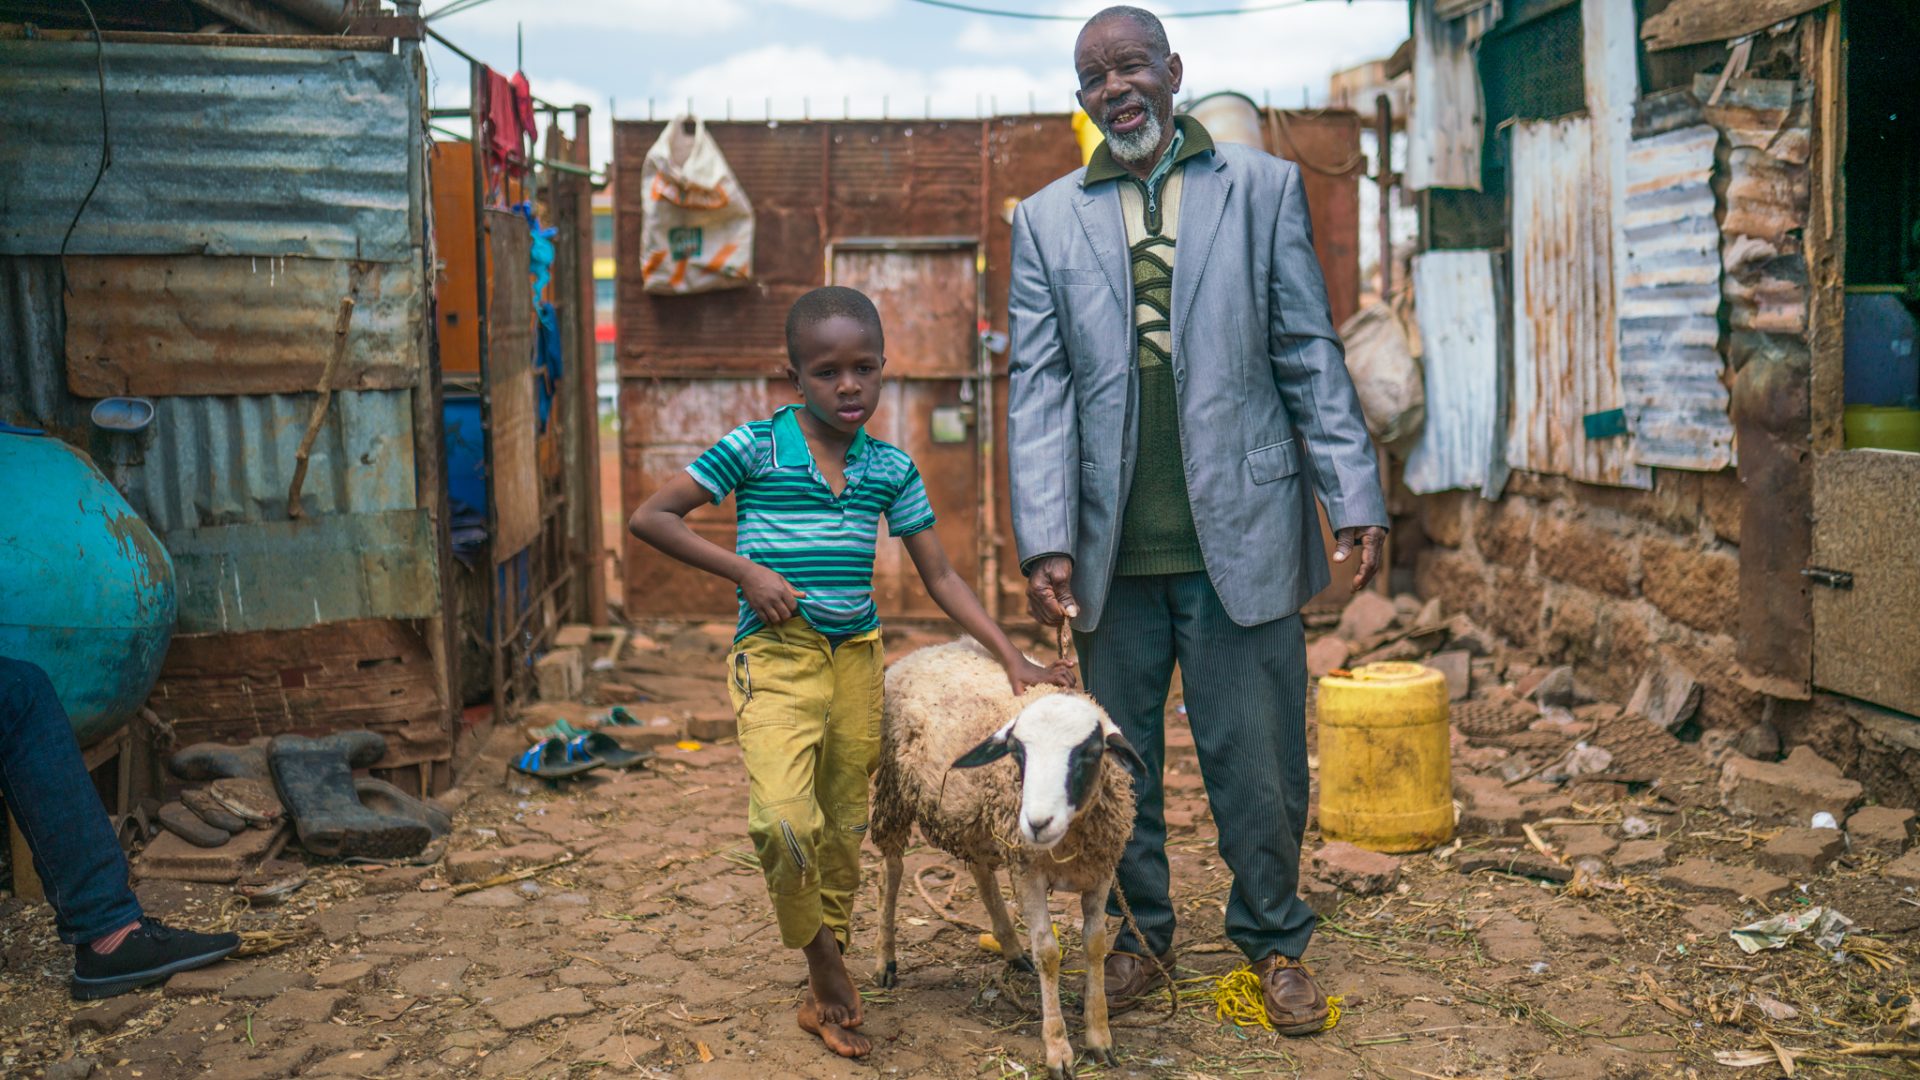 George poses with his son and one of his sheep